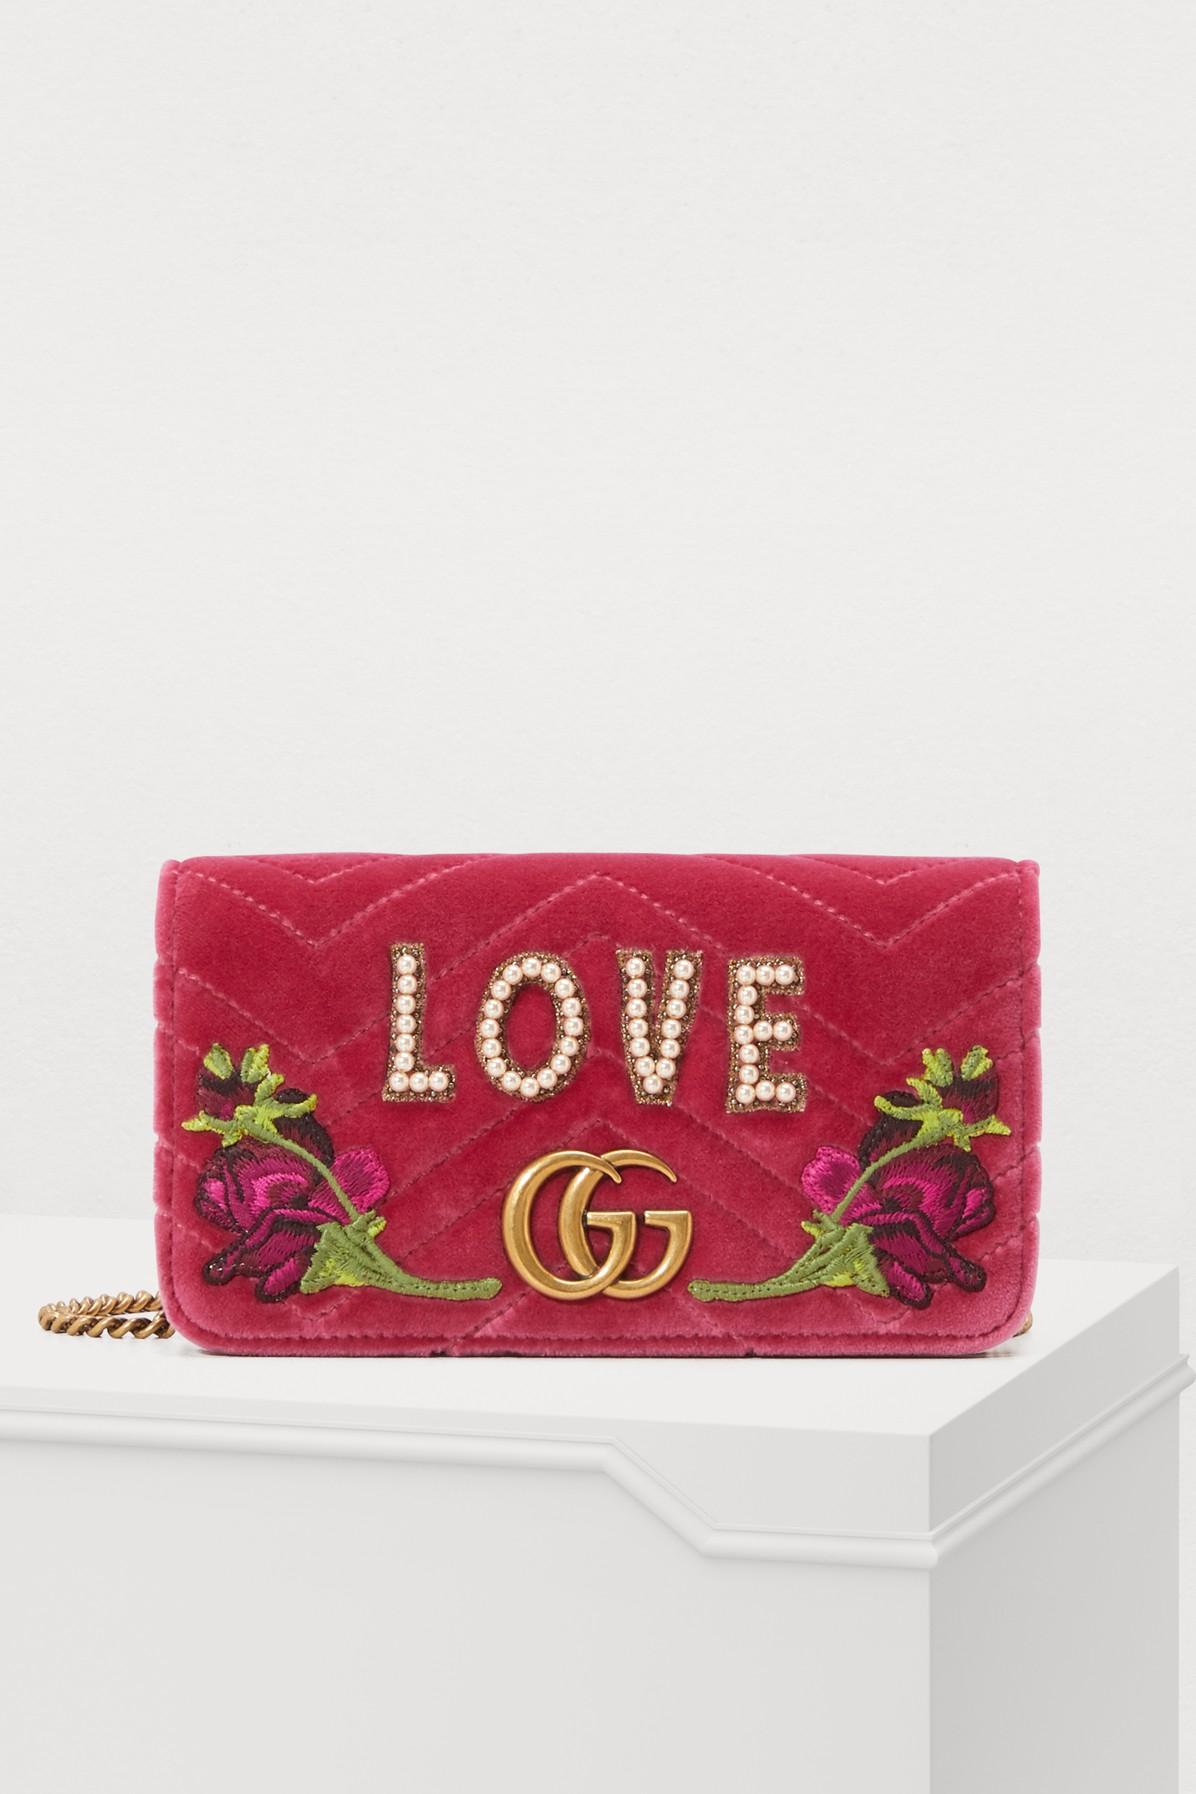 Gucci GG Marmont Love Mini Bag in Pink - Lyst